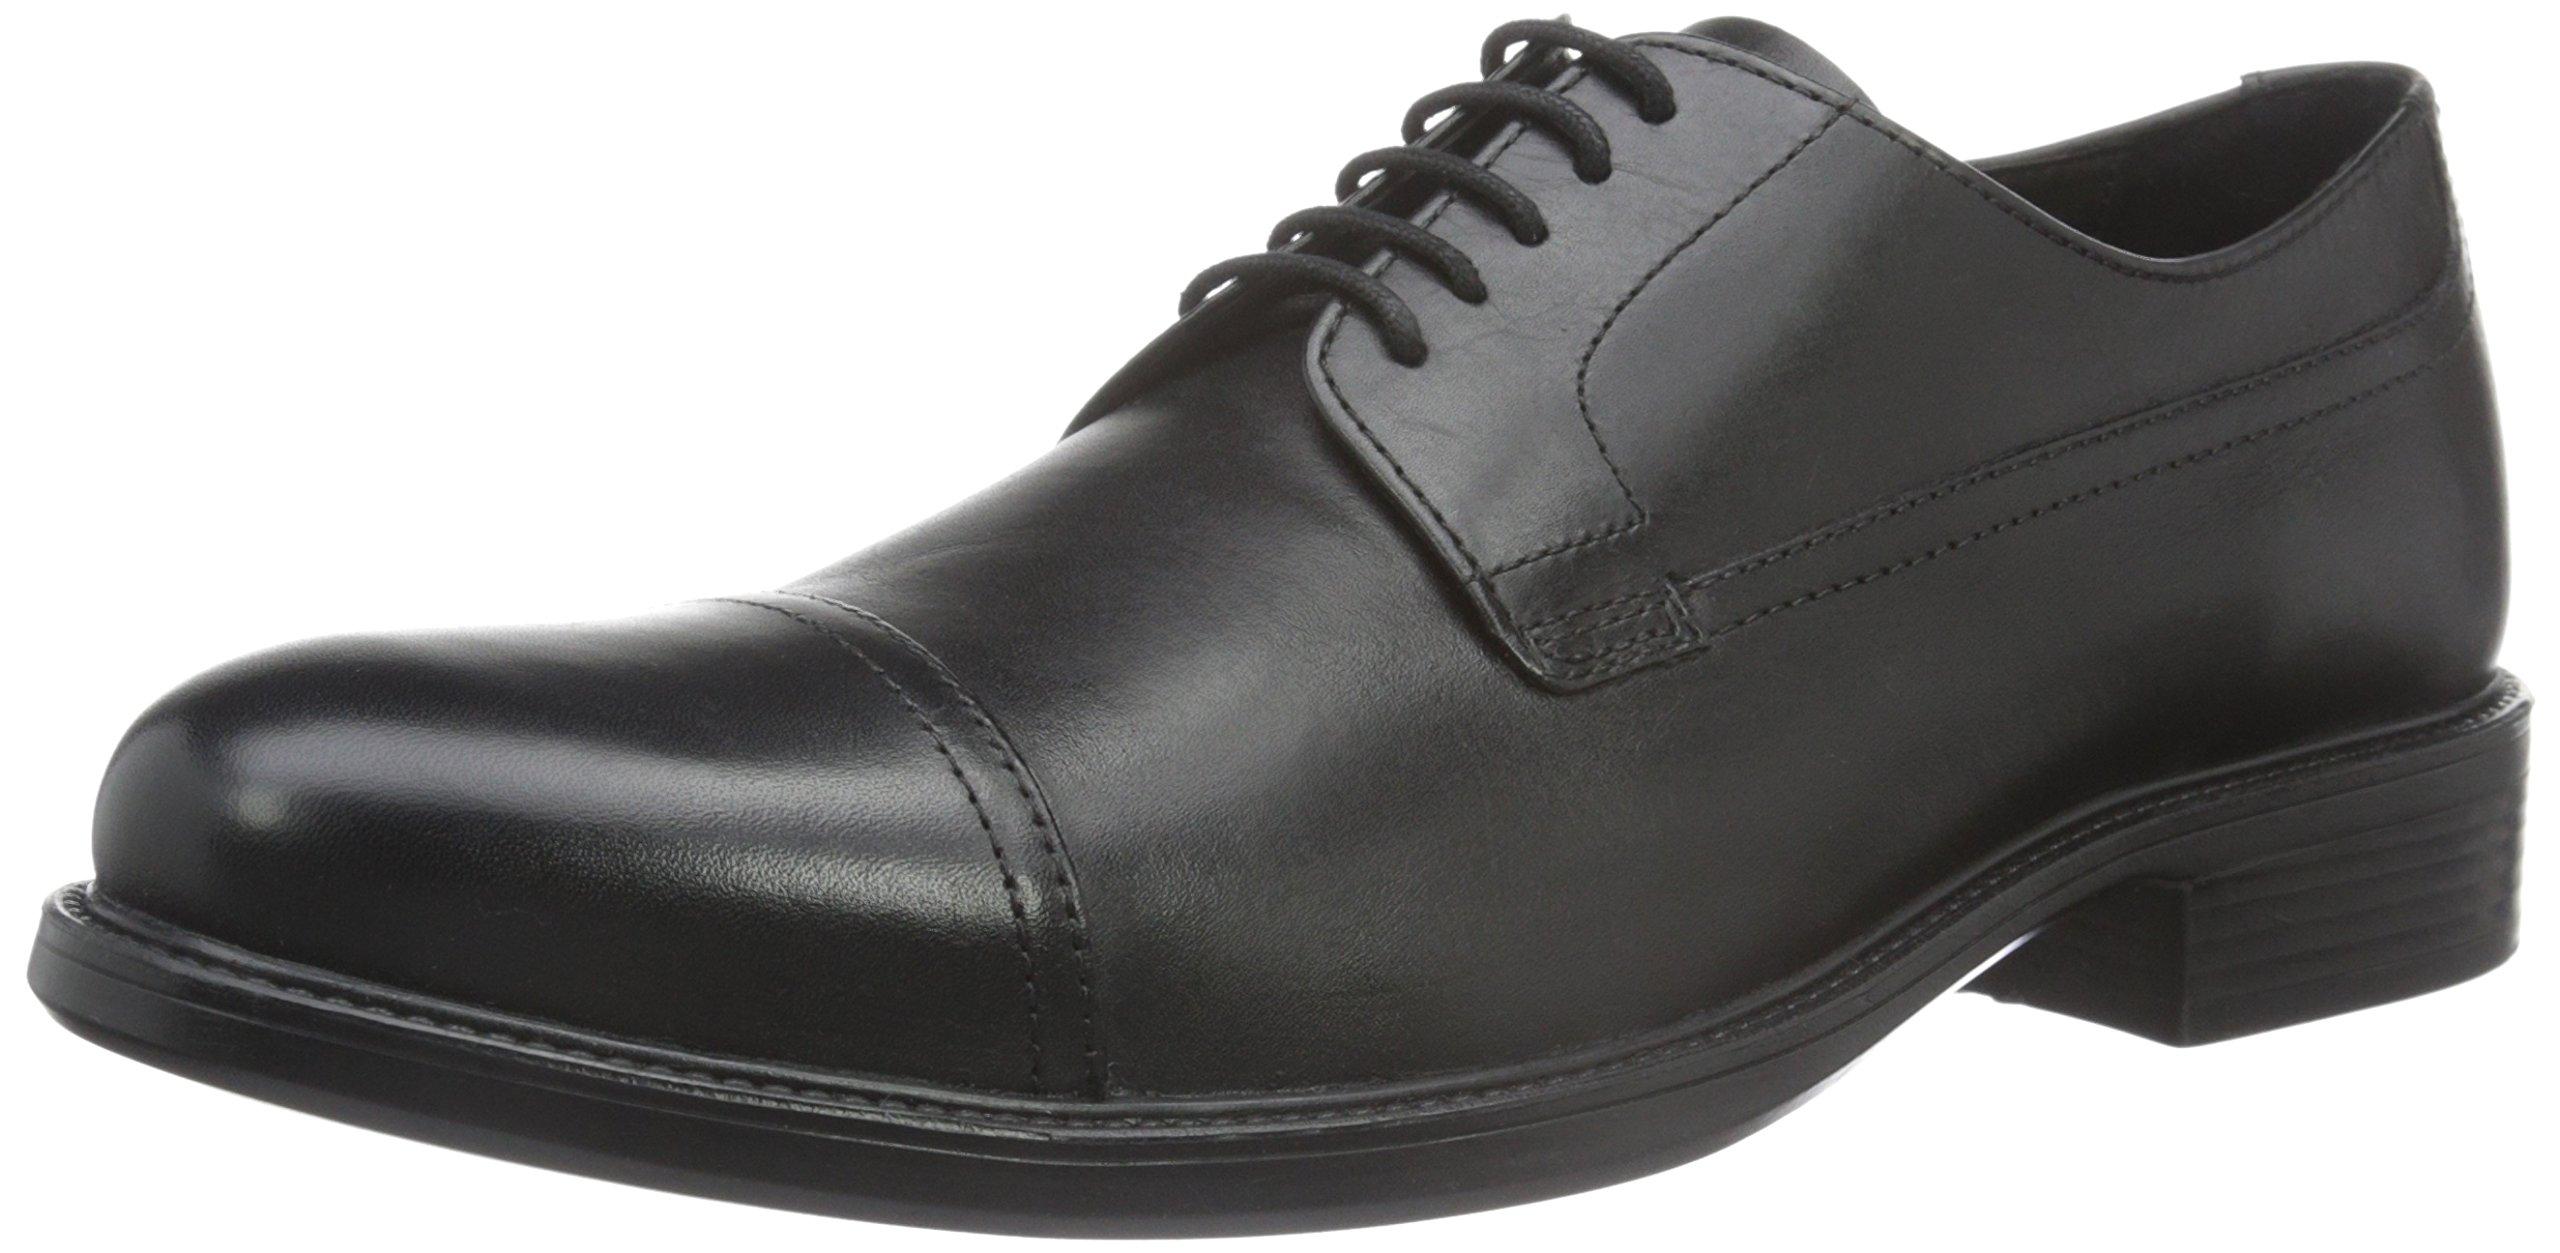 Geox Uomo Carnaby G Oxford in Black for Men - Save 53% - Lyst